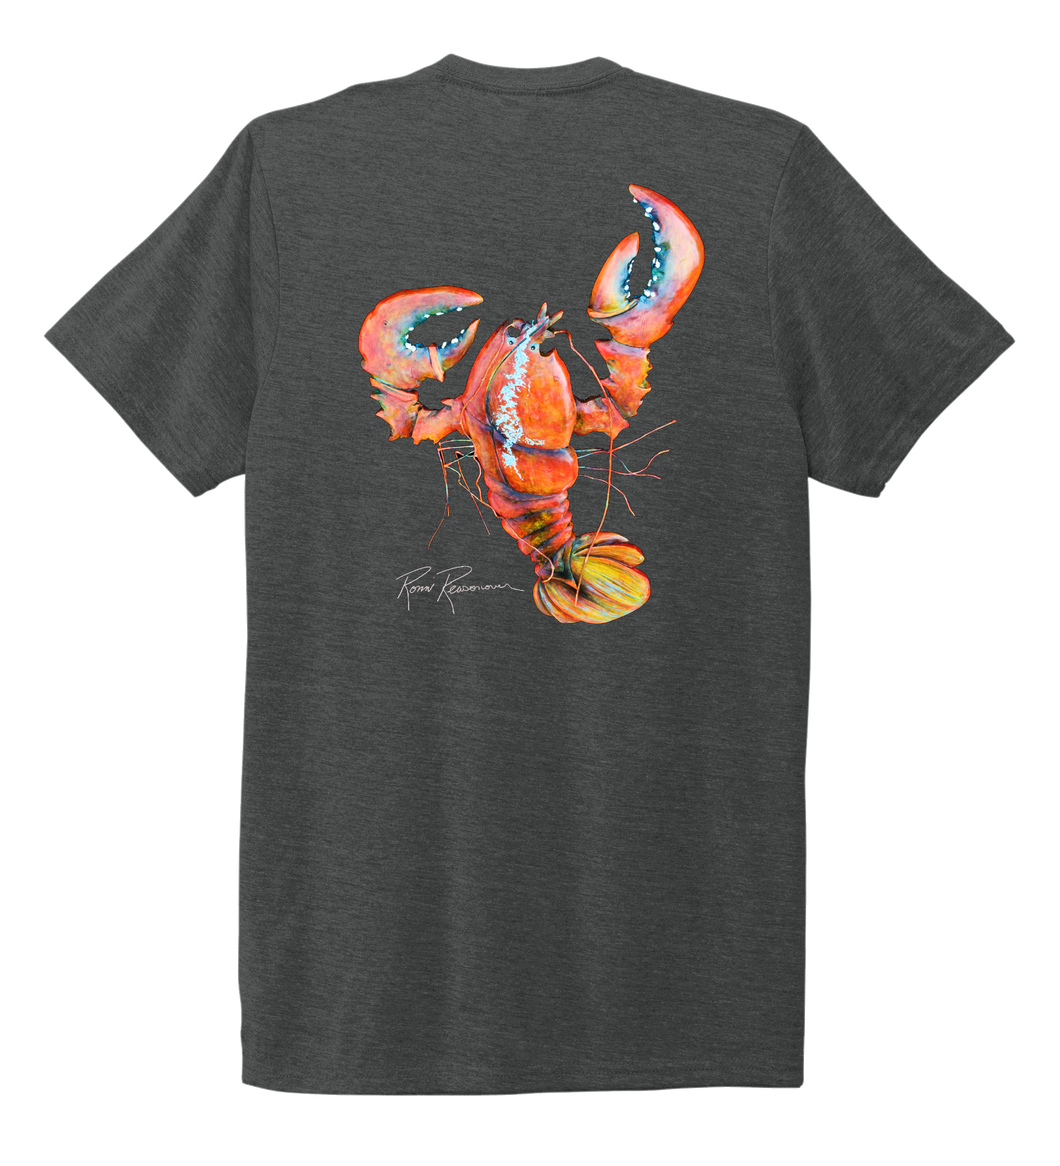 Ronnie Reasonover, The Lobster, Crew Neck T-Shirt in Slate Black